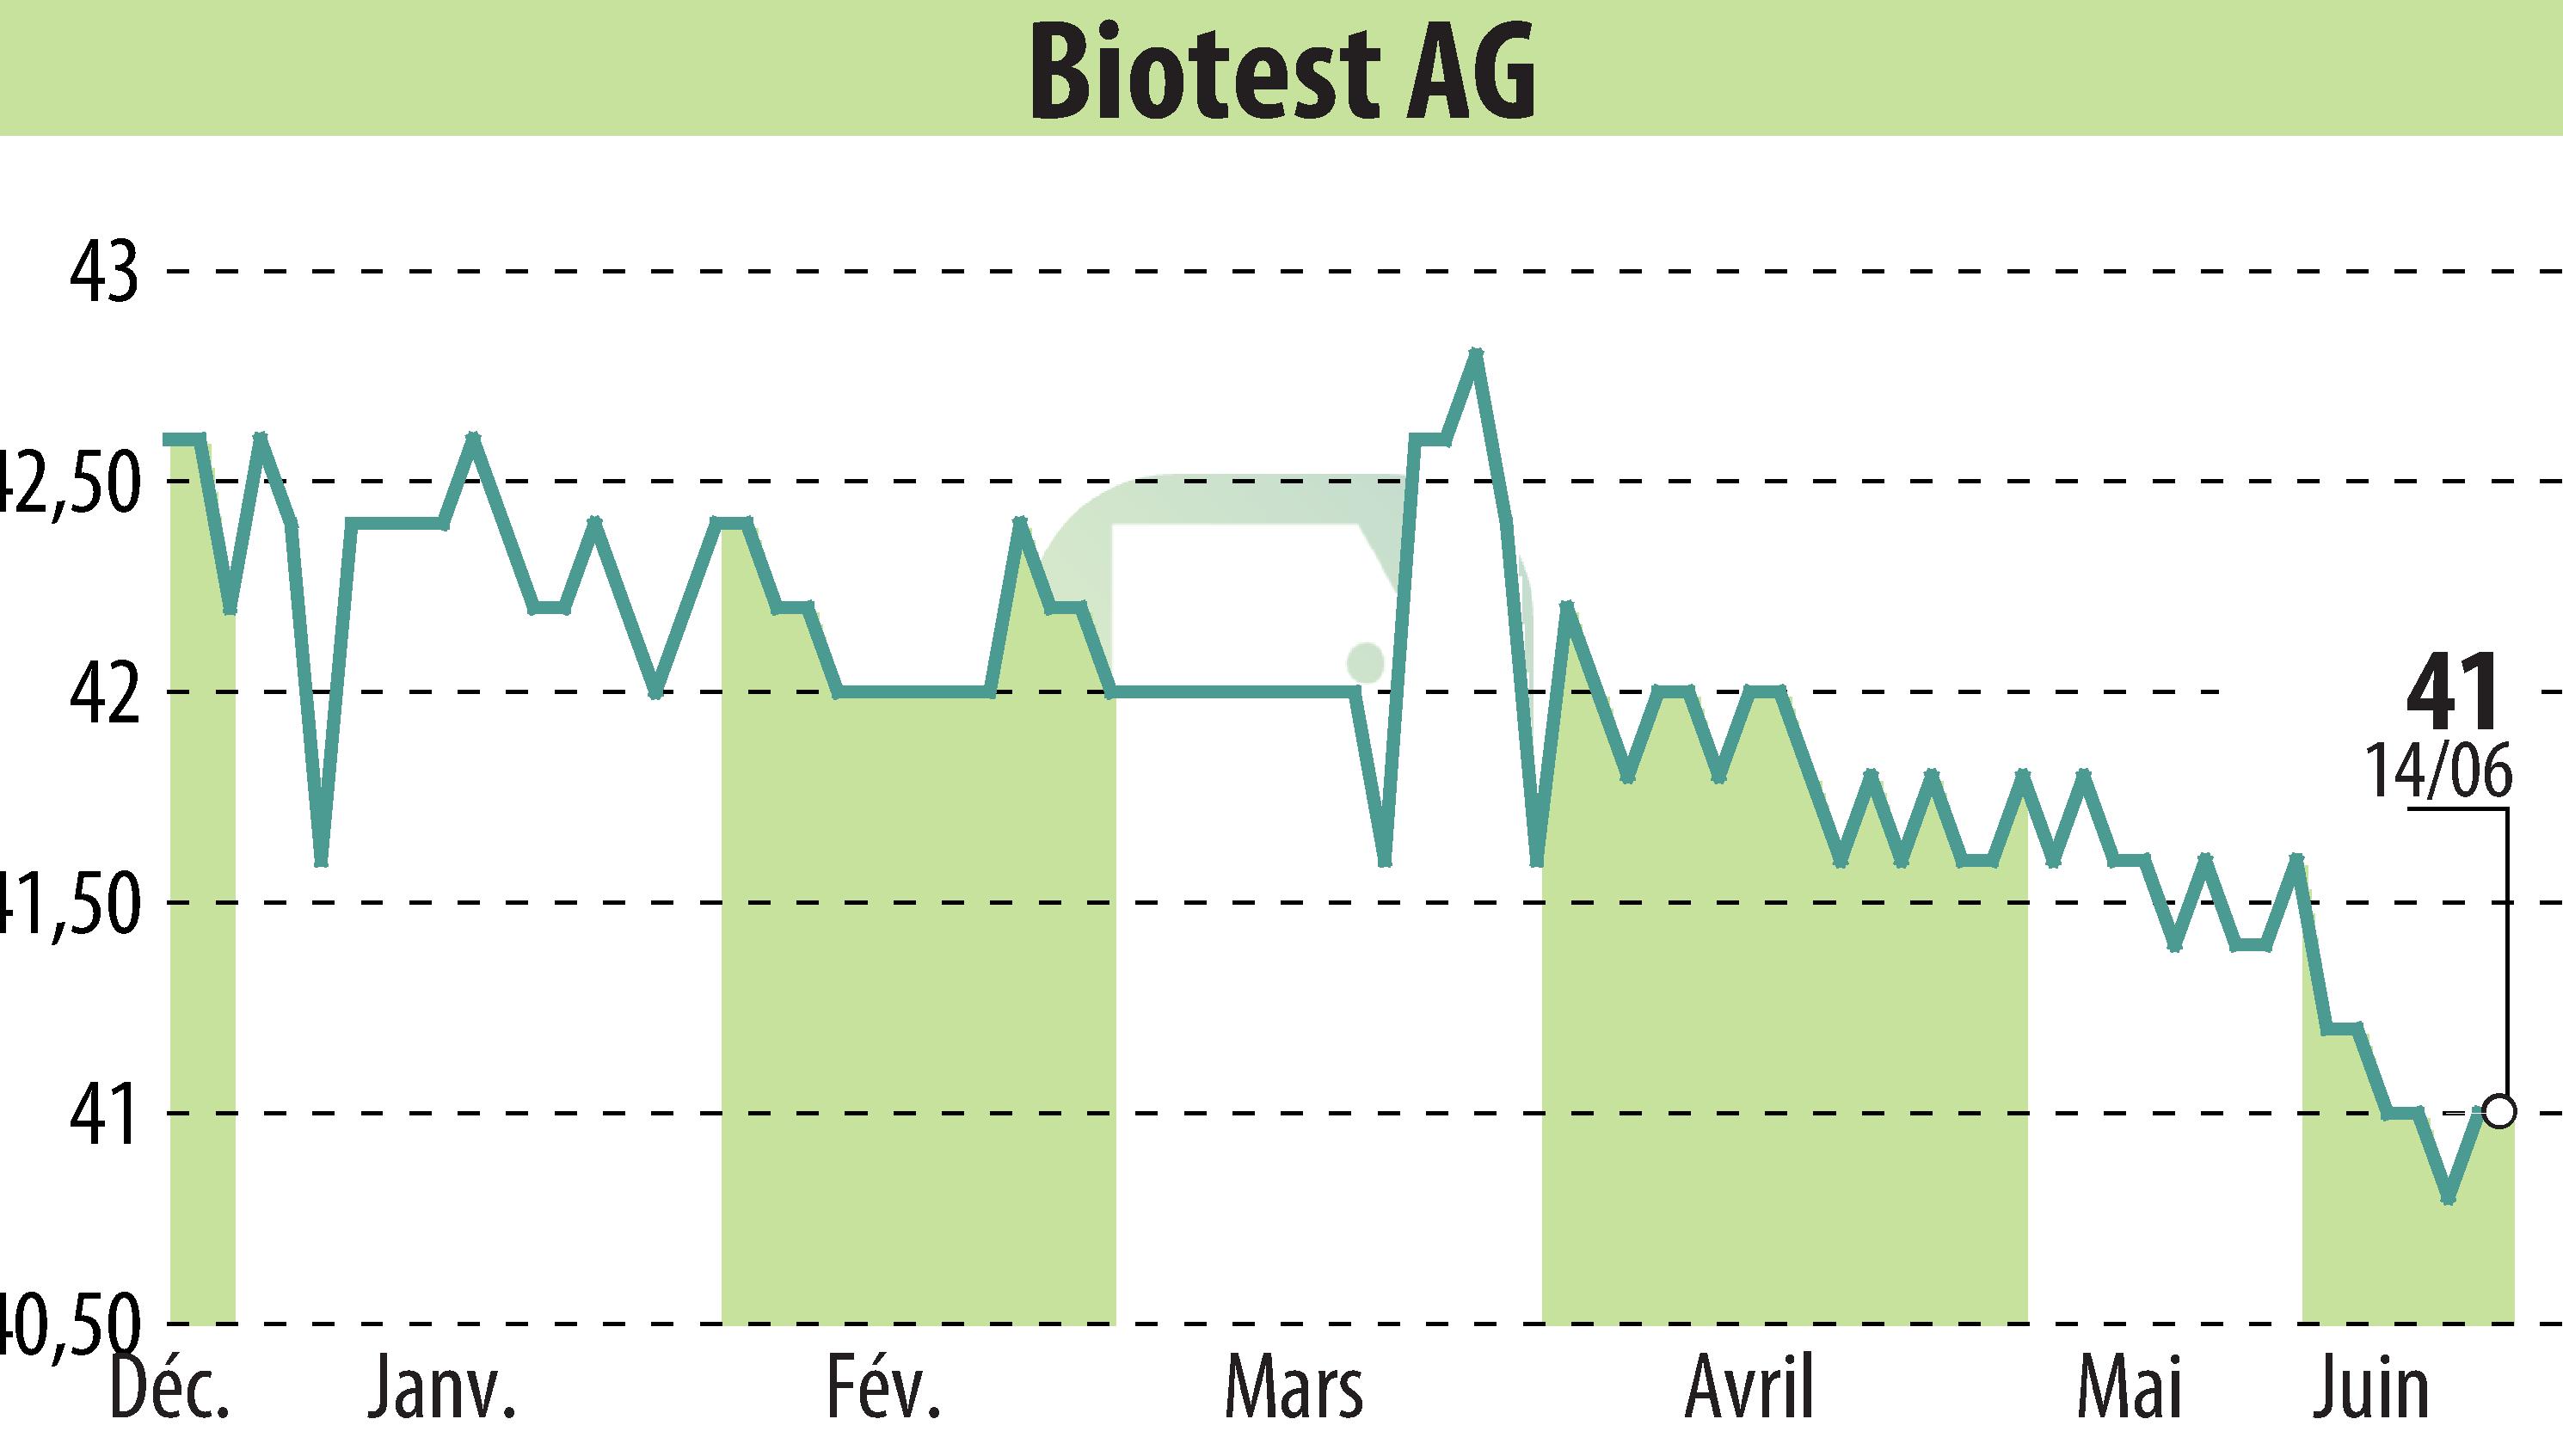 Stock price chart of Biotest AG (EBR:BIO) showing fluctuations.